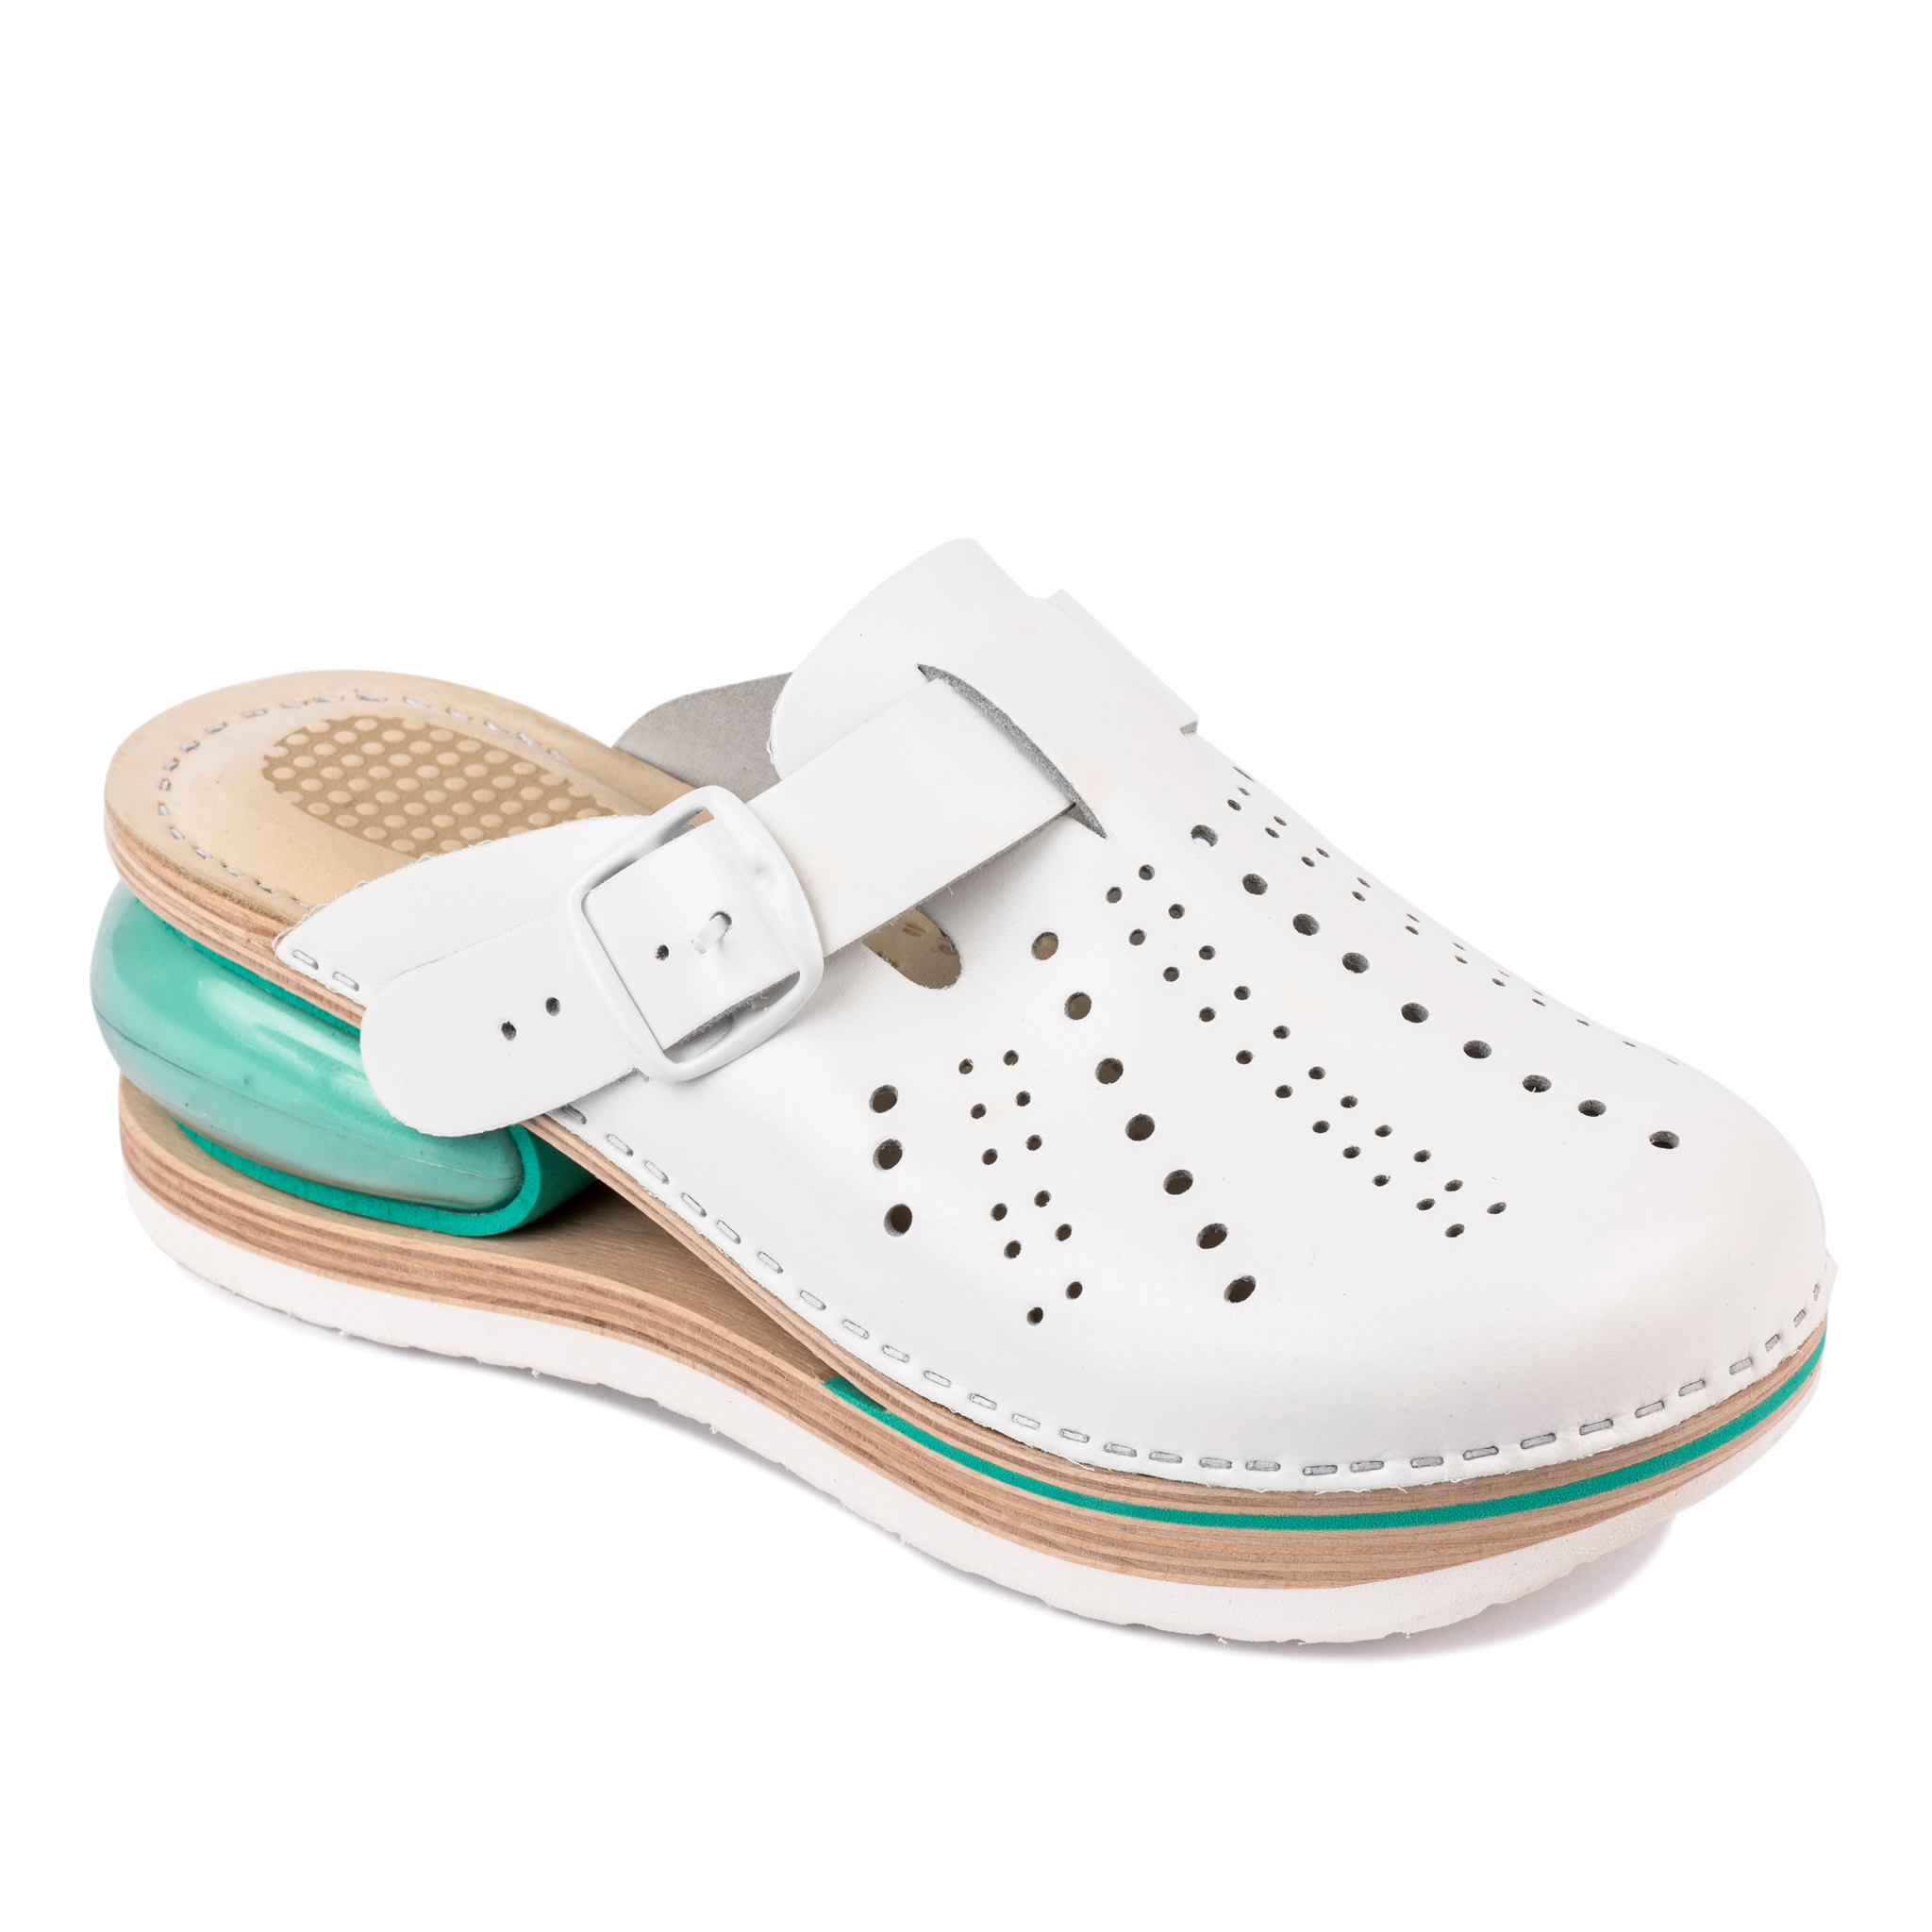 AIR LEATHER CLOGS WITH BELT - WHITE